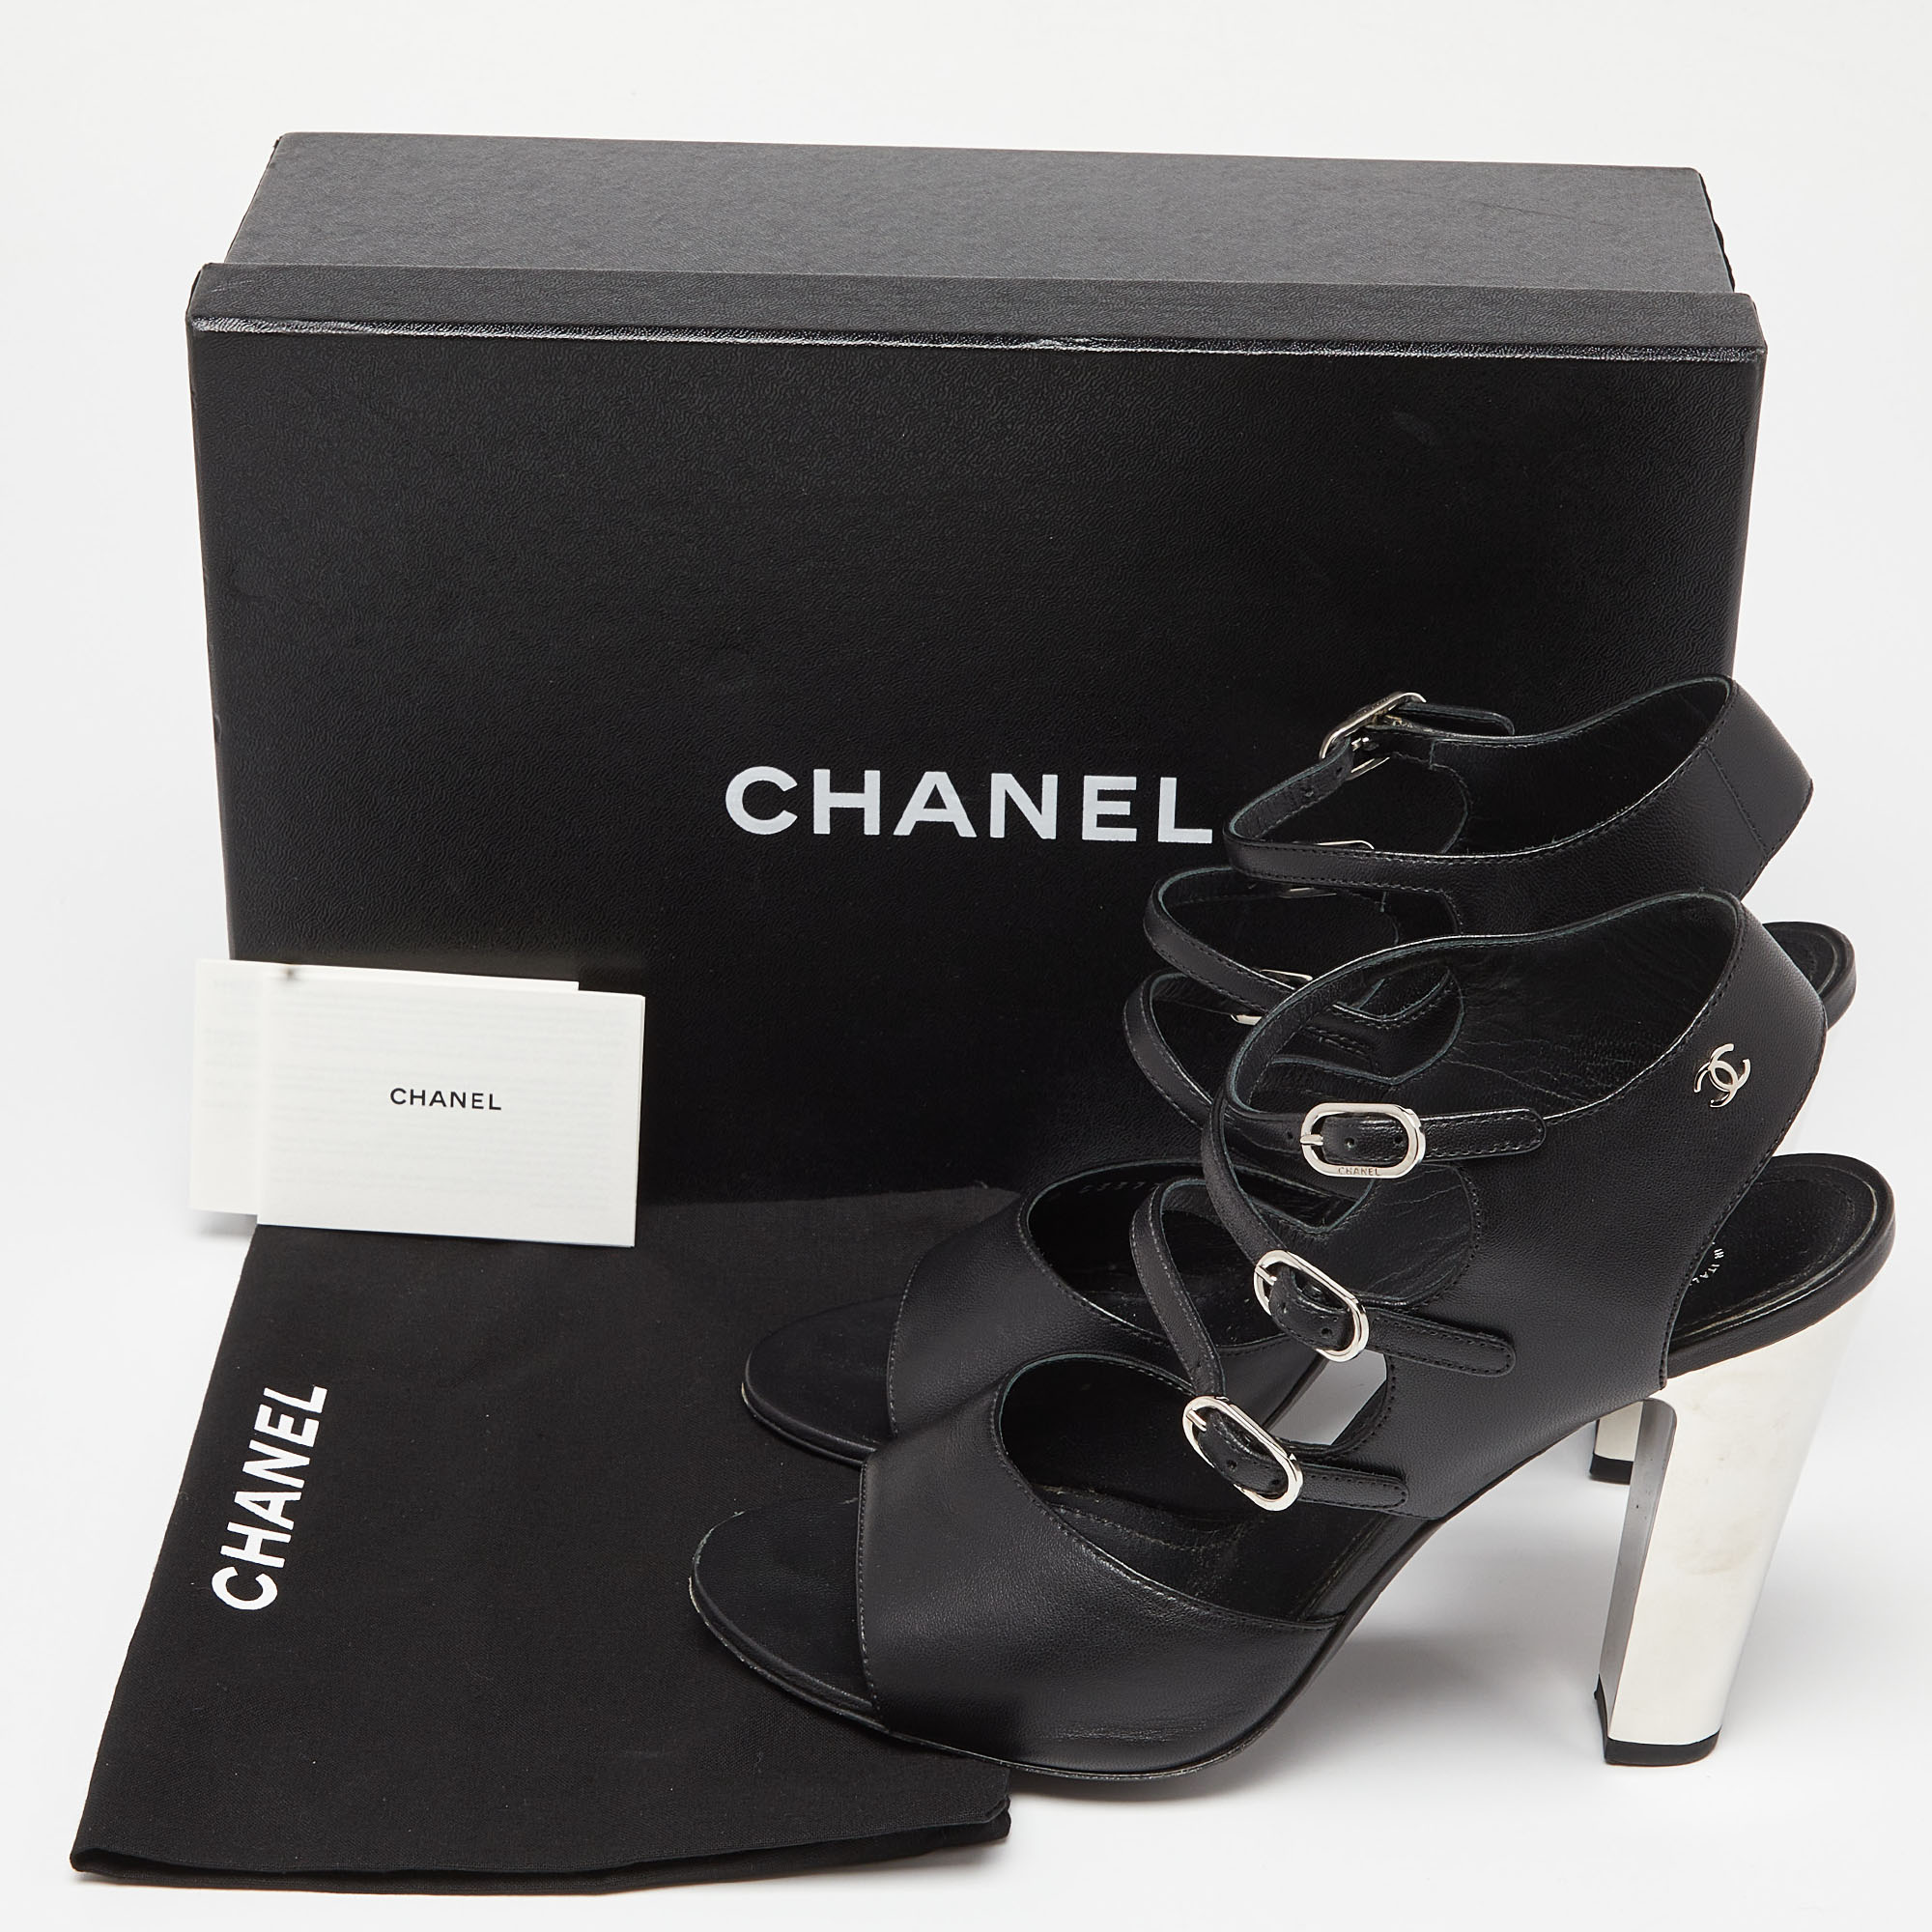 Chanel Black Leather Strappy Buckle Sandals Size 39